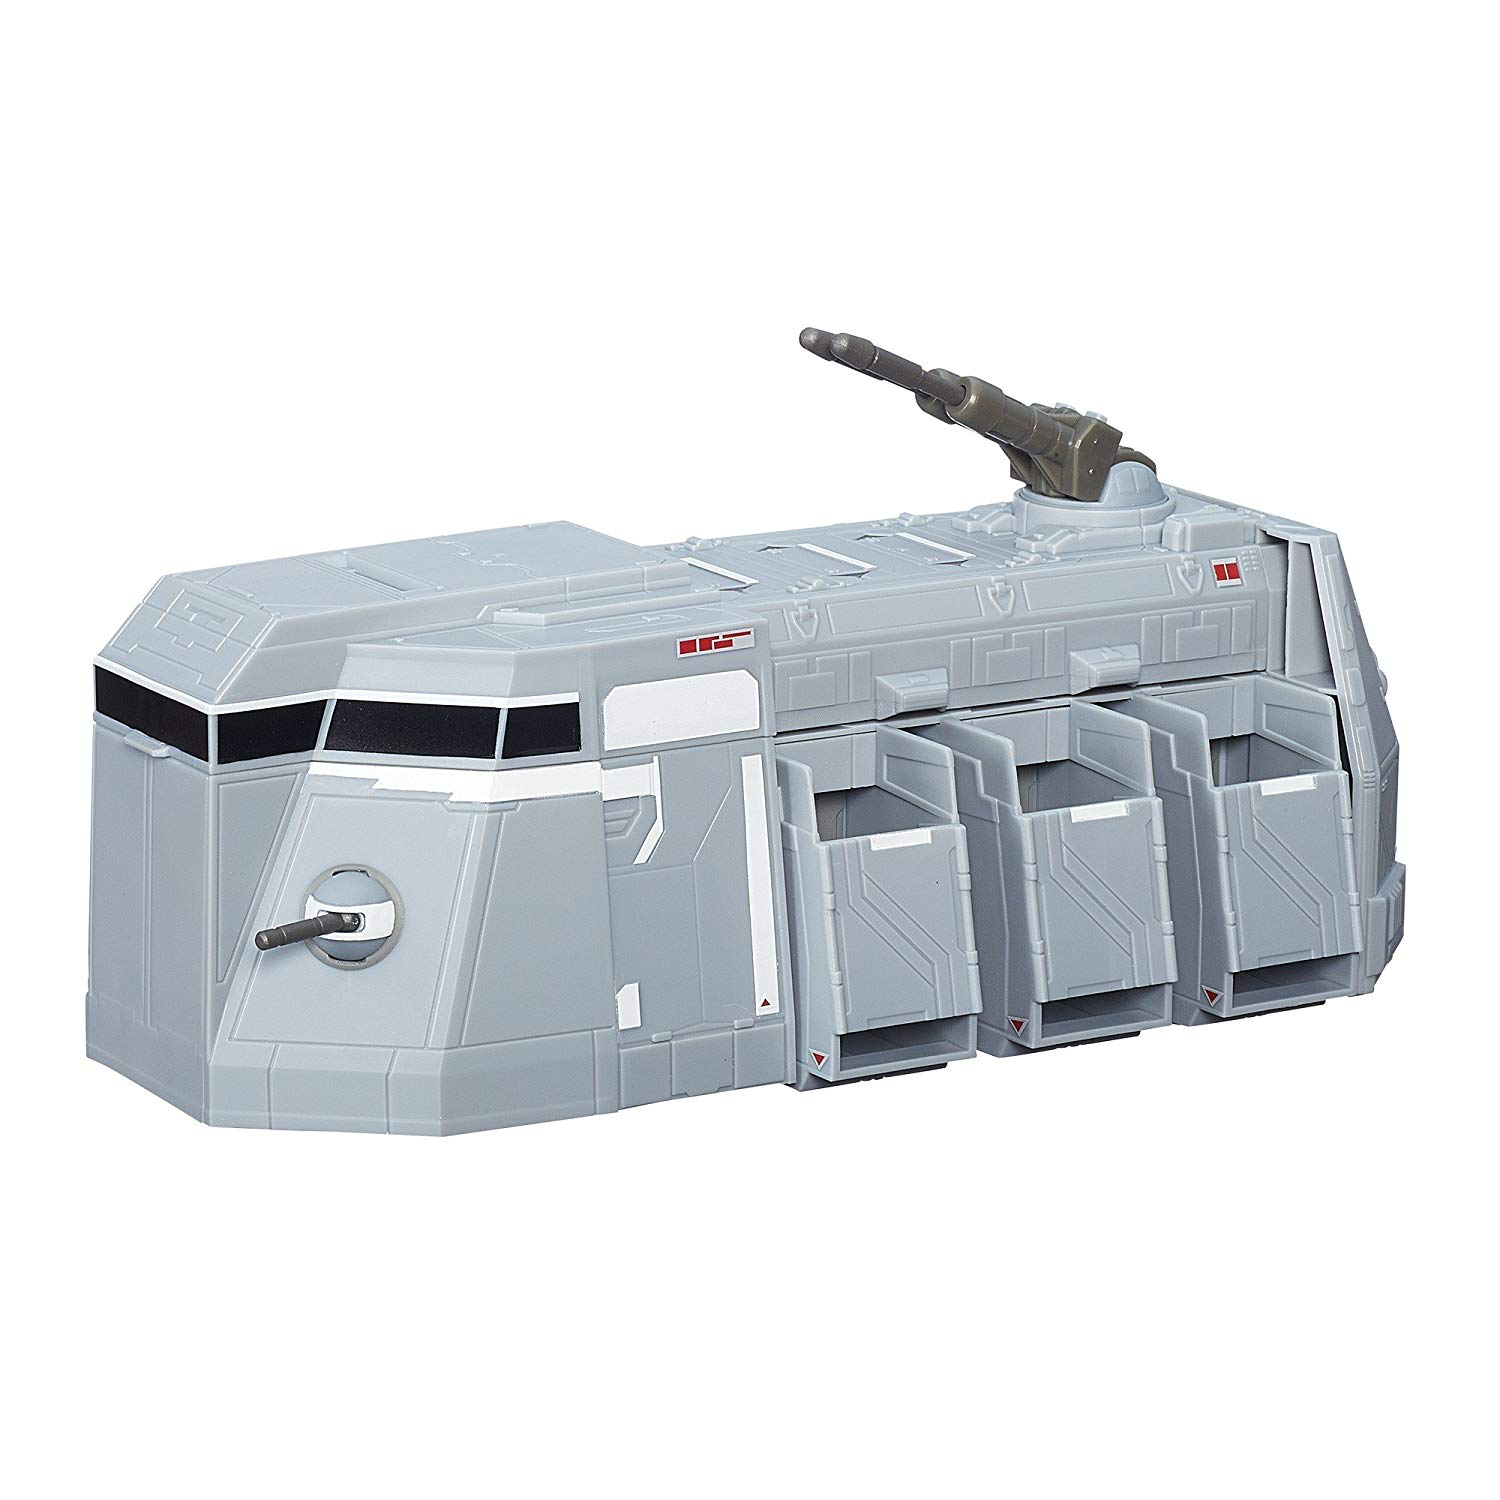 SWR Imperial Troop Transport Vehicle Toy 2